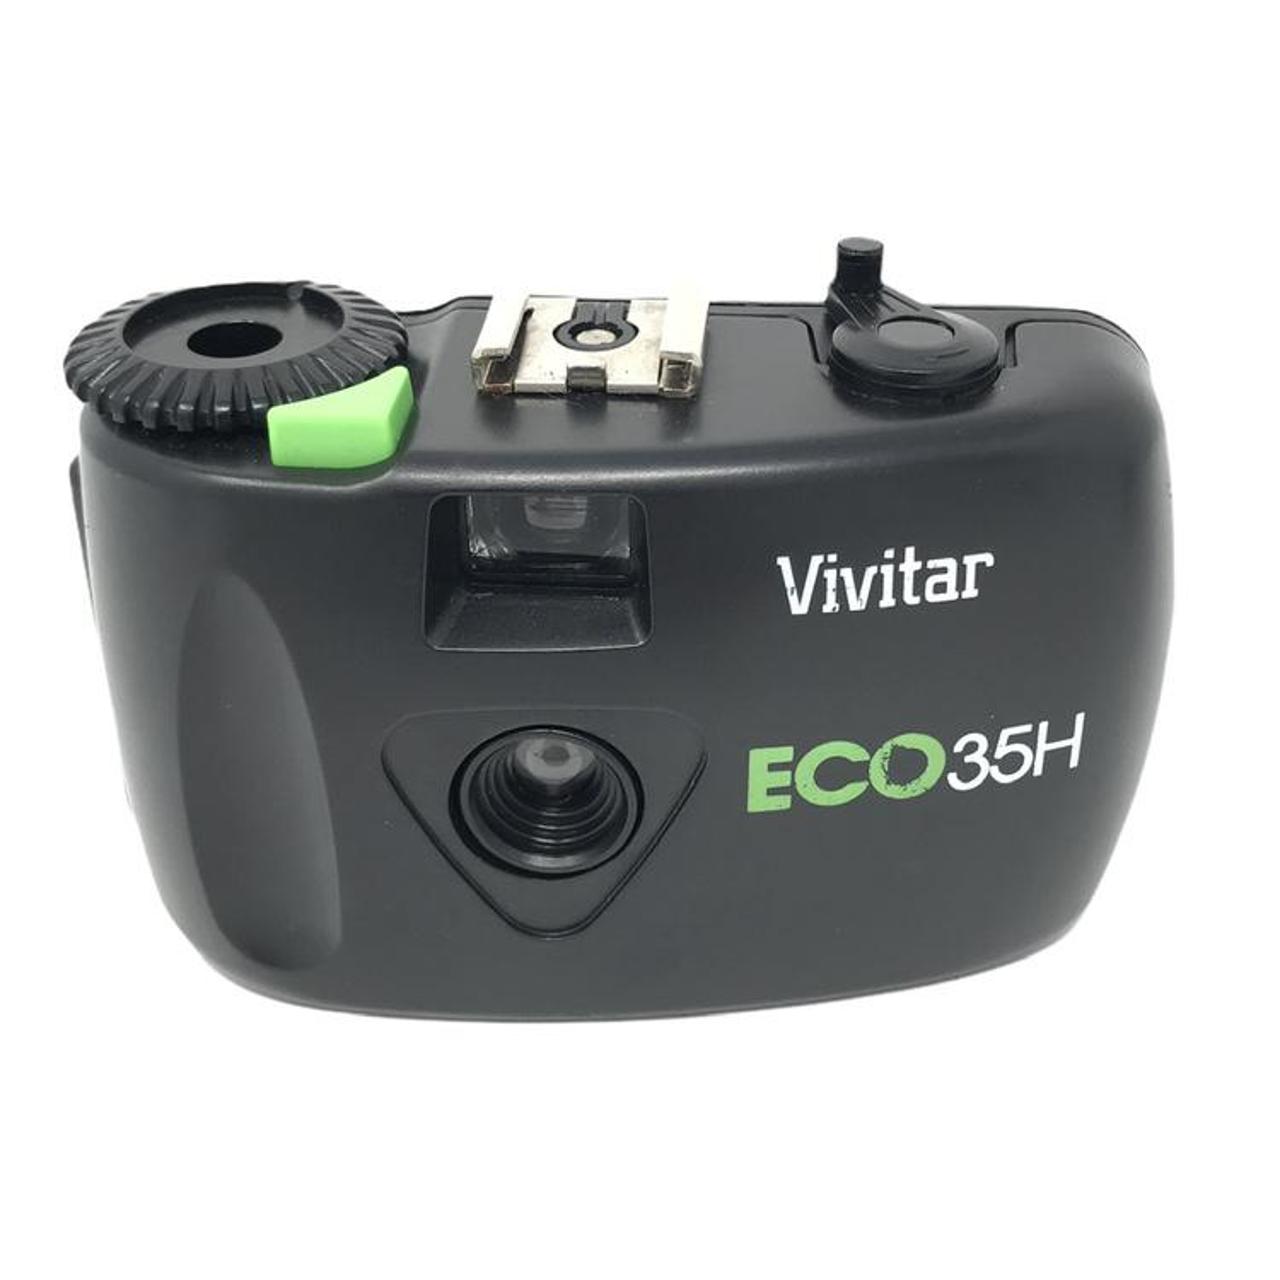 Product Image 1 - Vivitar Eco35H Film Camera

Doesn't require